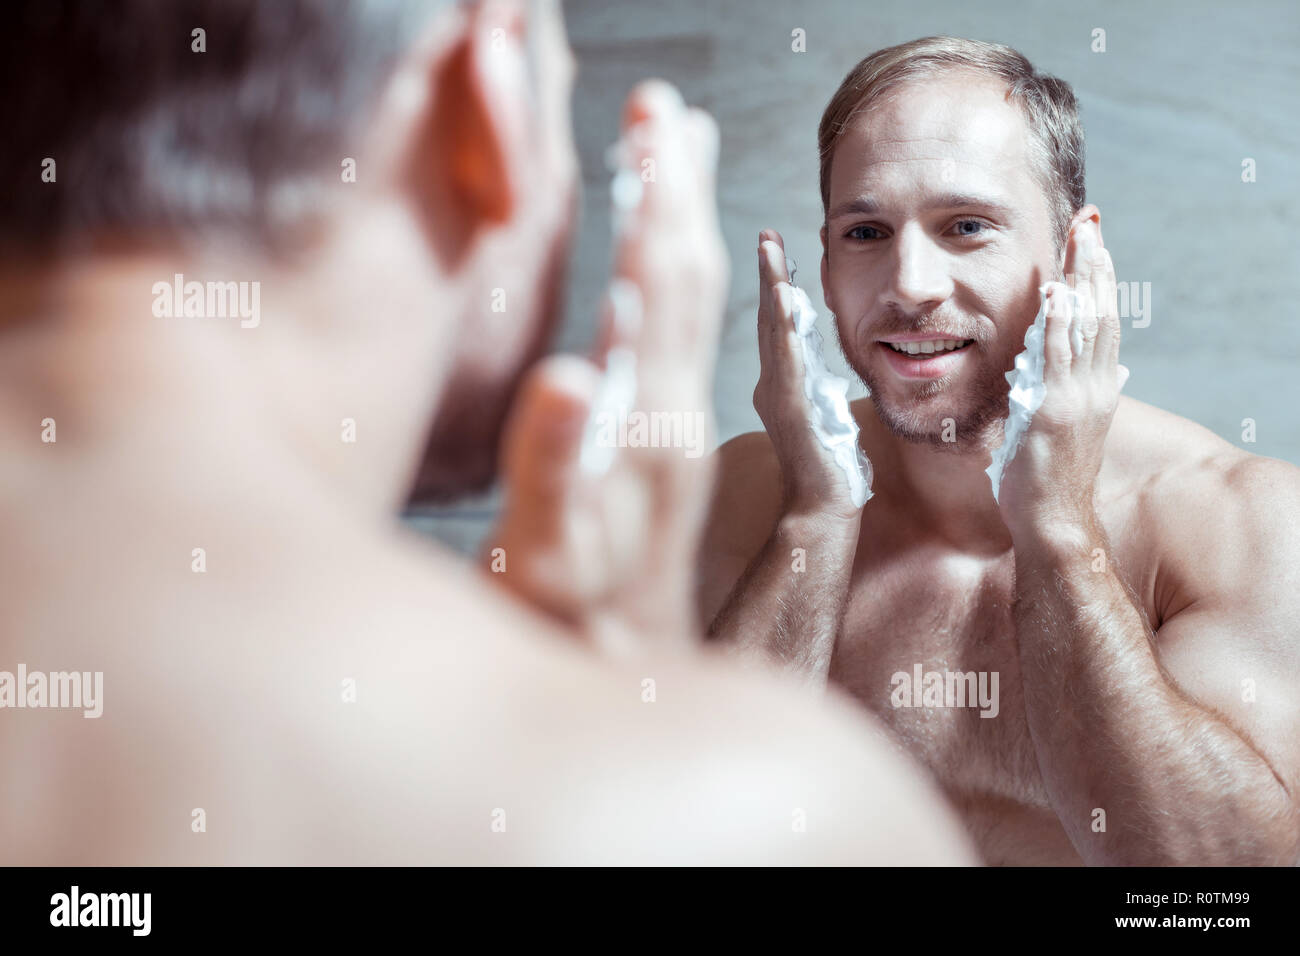 Cheerful blue-eyed man smiling while looking into mirror and shaving face Stock Photo